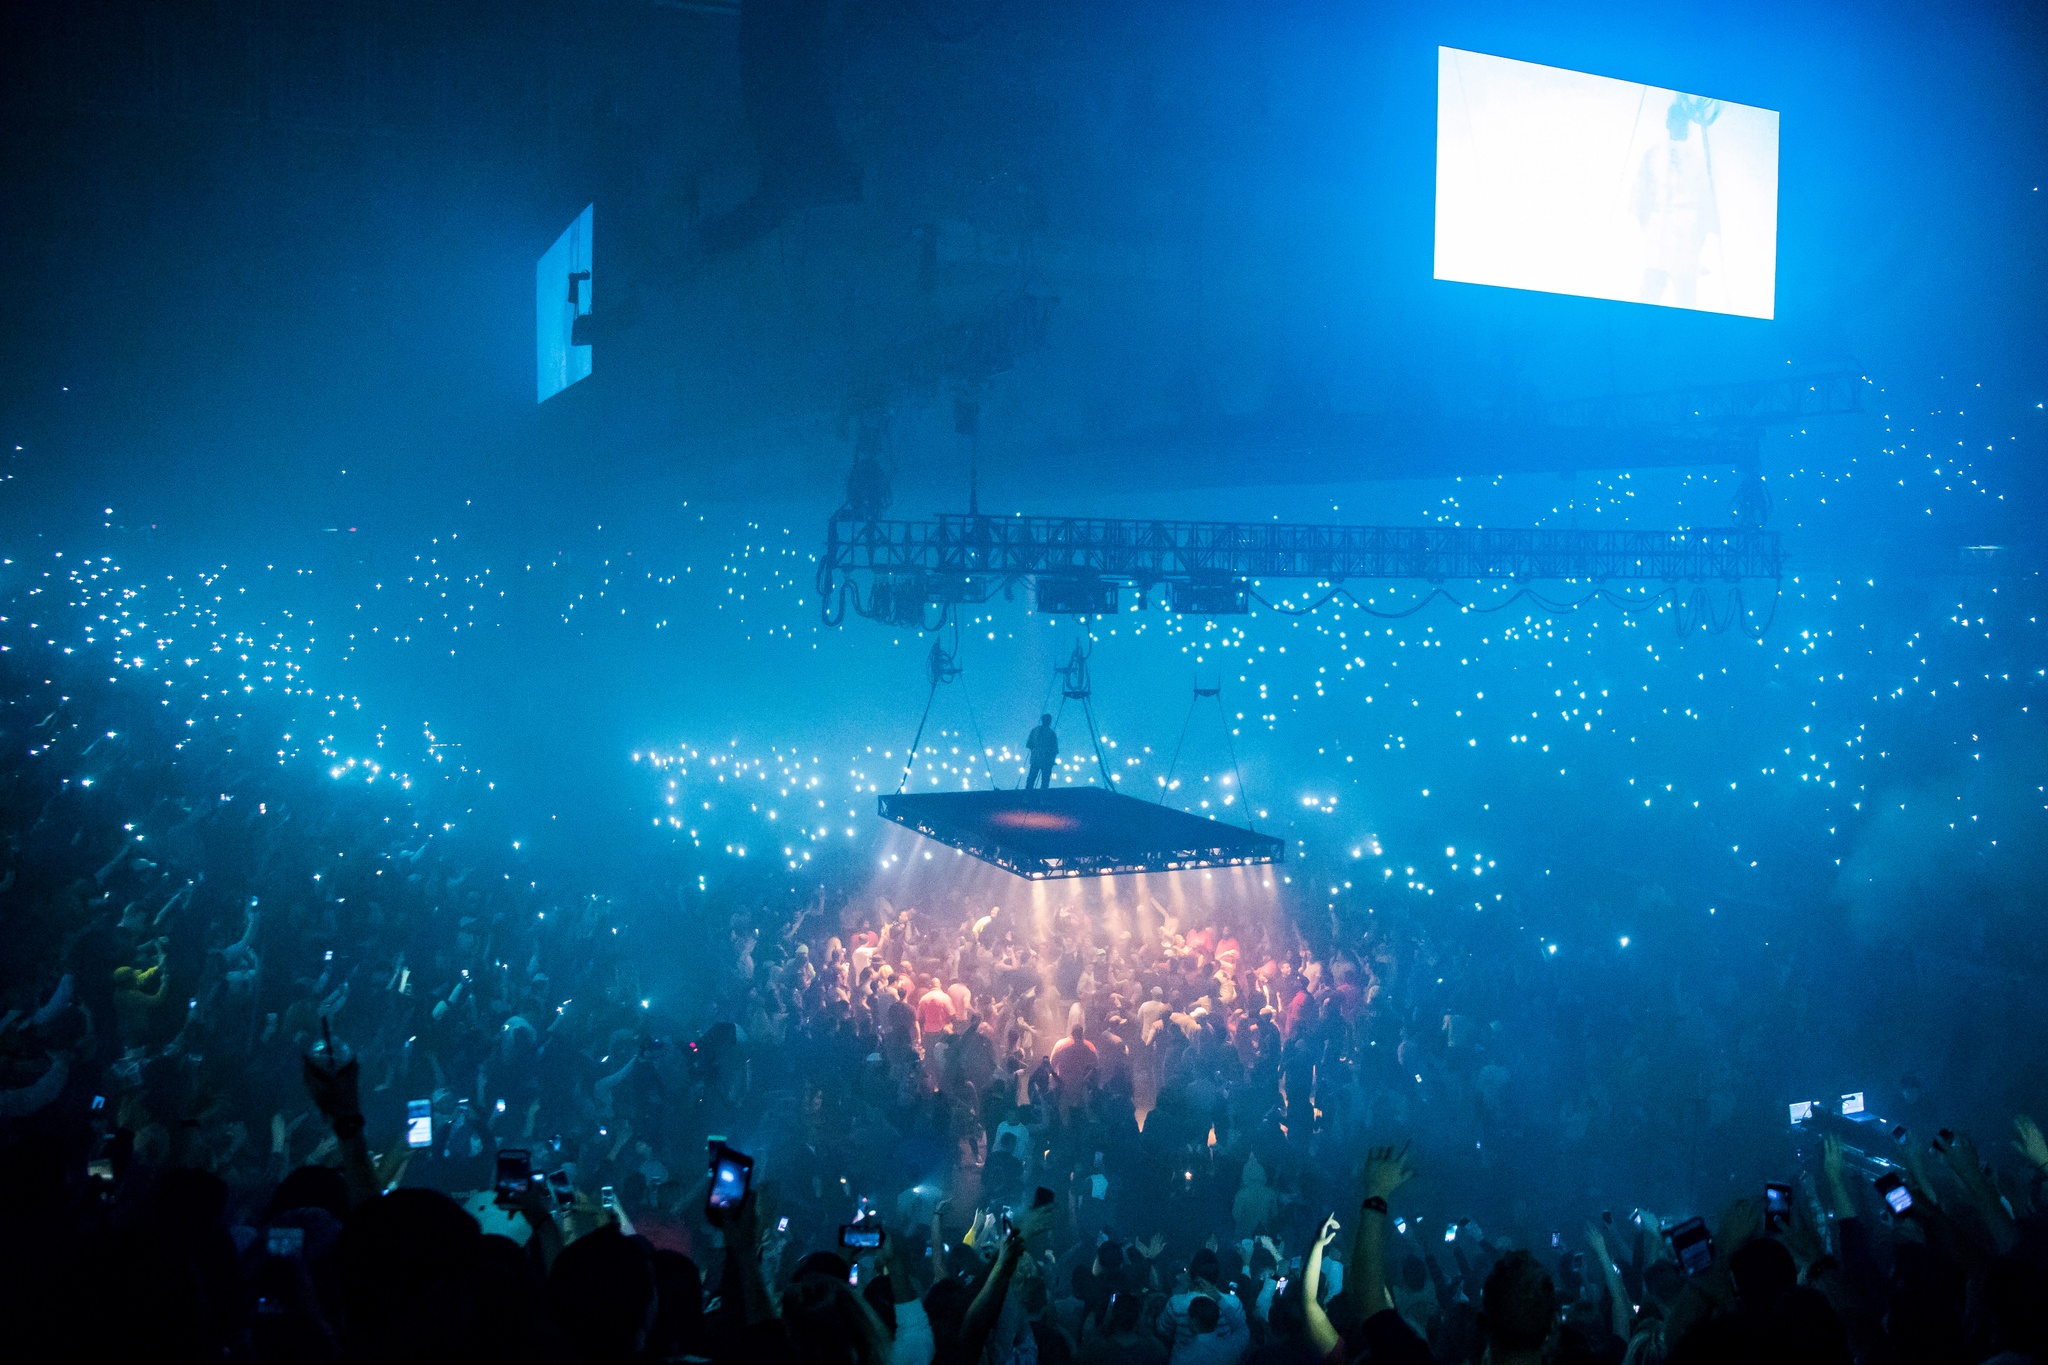 A crowd at an arena concert watching a performer on a raised platform at the center